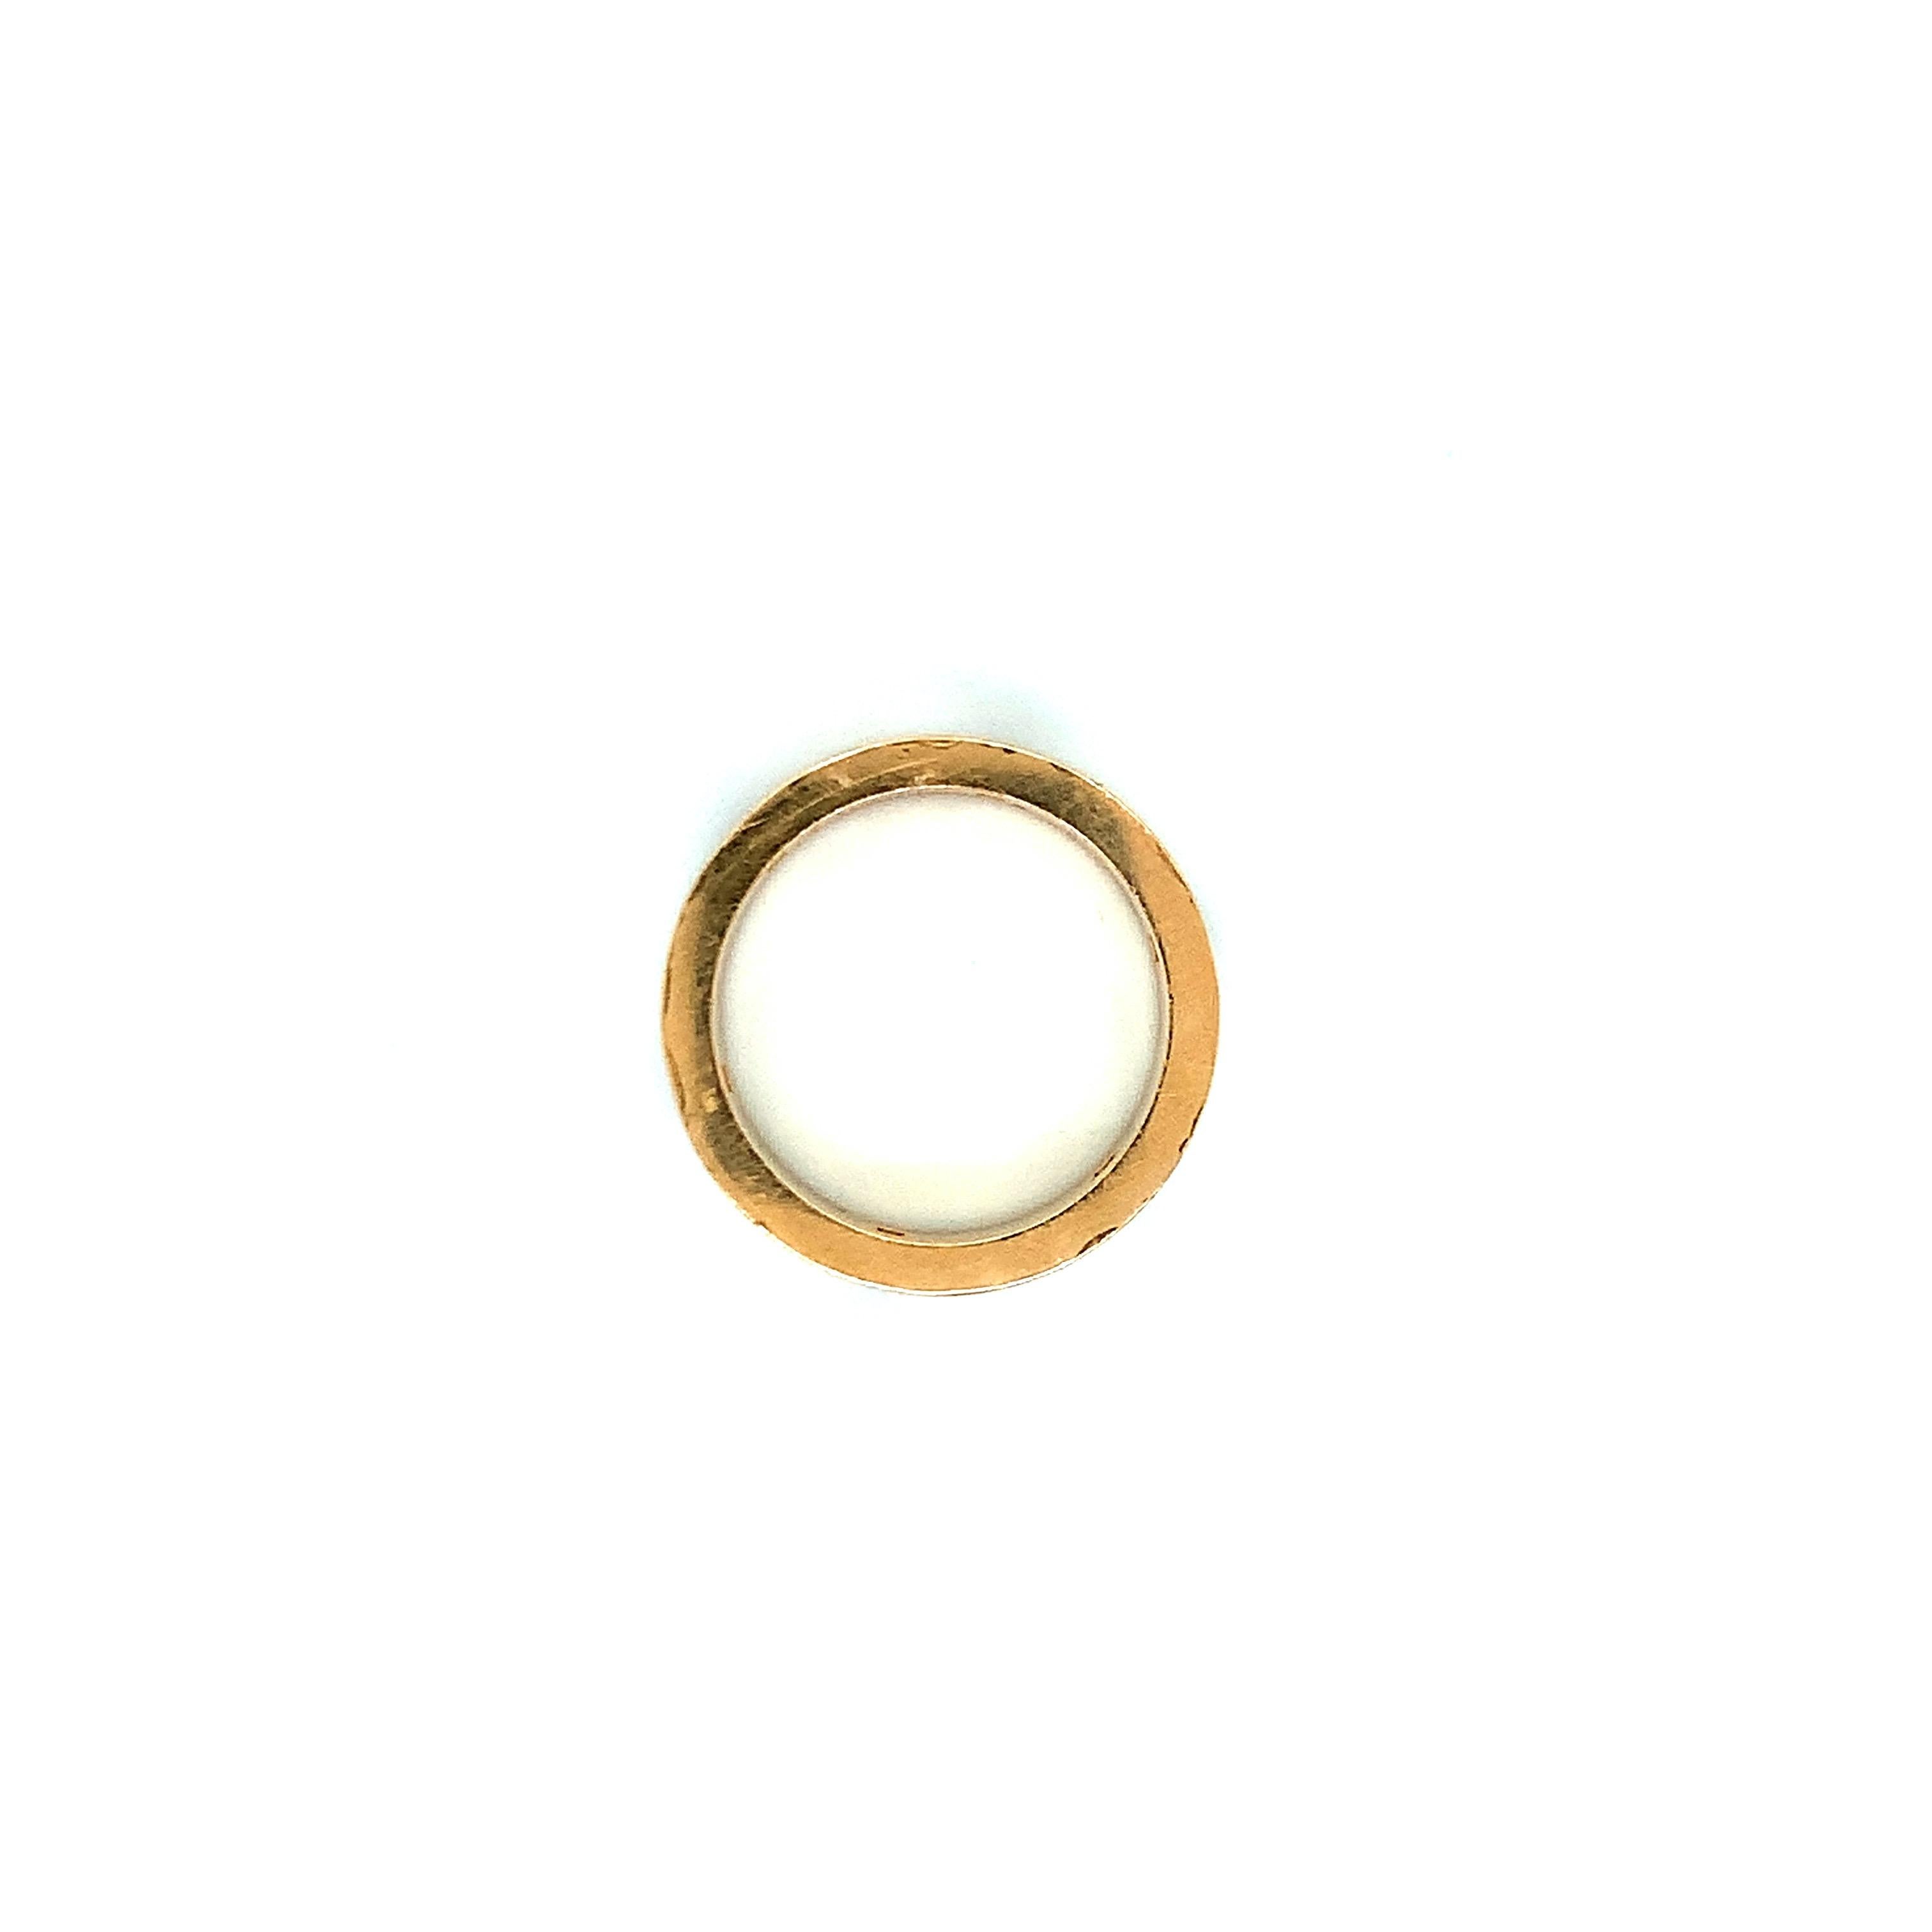 A classic Cartier creation, this 18 karat gold love ring features multiple gemstones found around the band. Total weight: 9.1 grams. Size 6.5-6.75. (European 53). 

Serial No. PF 9811